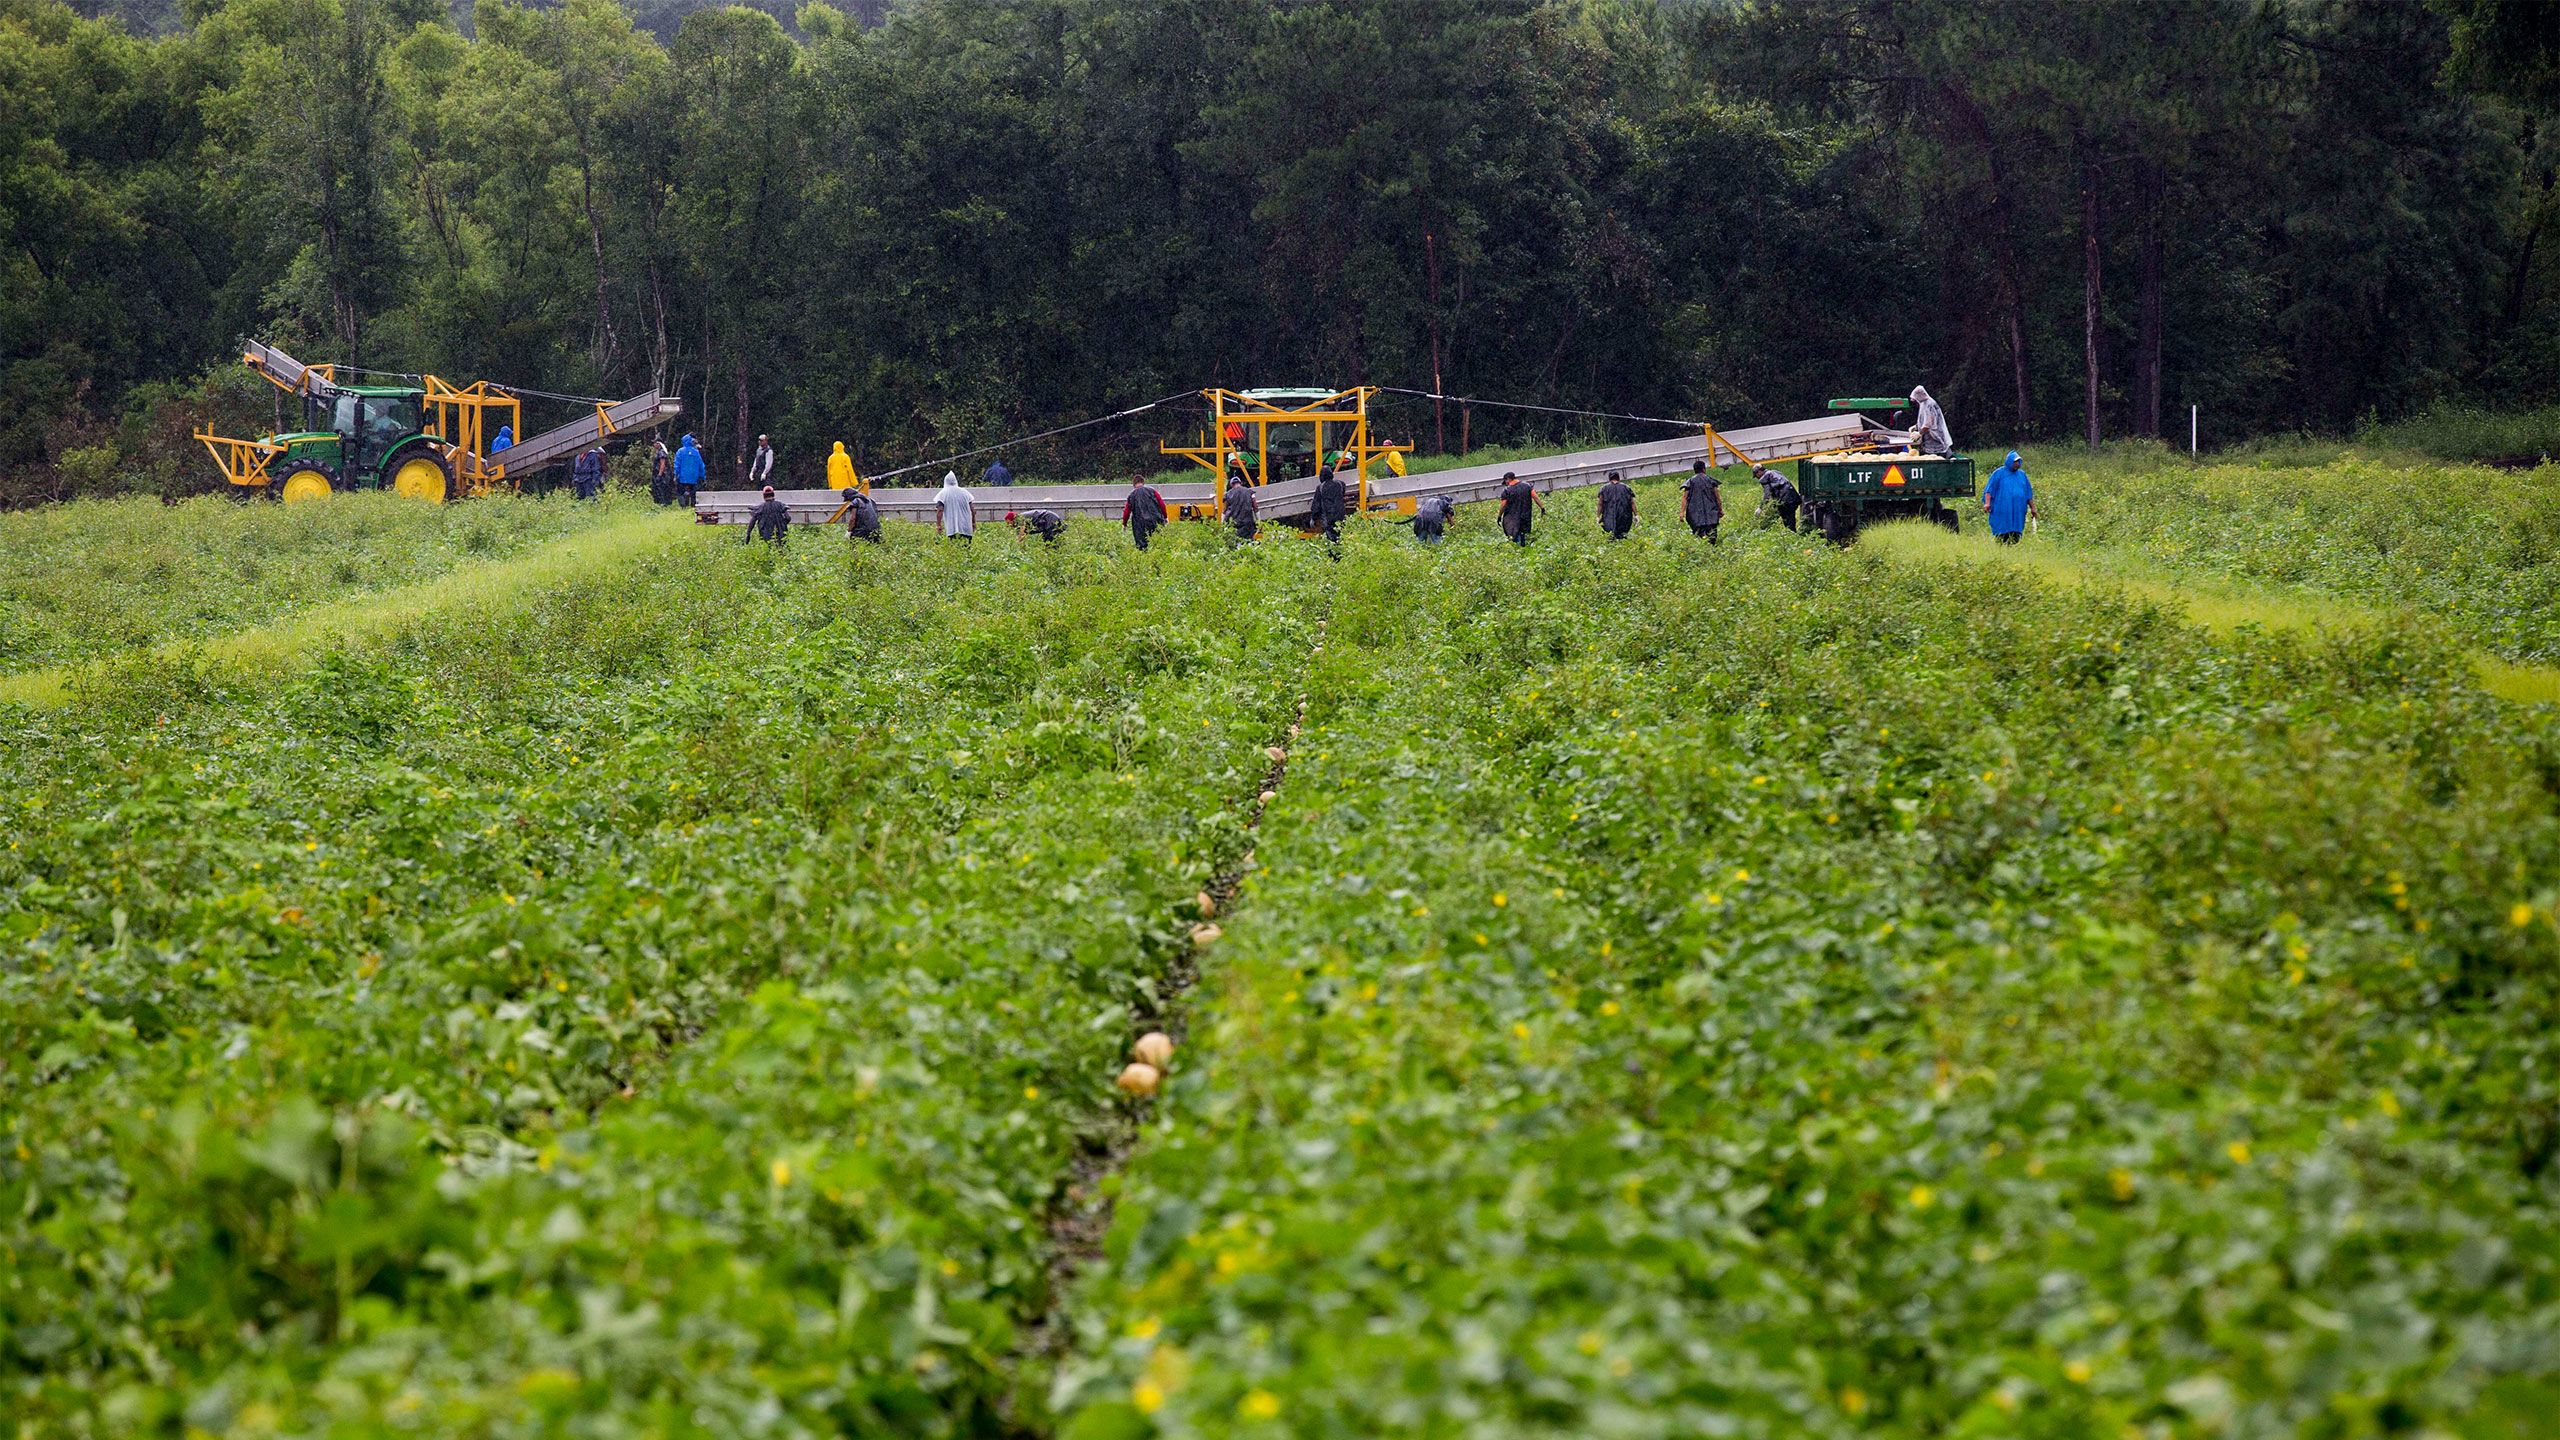 Workers and tractors in a green field where melons are grown